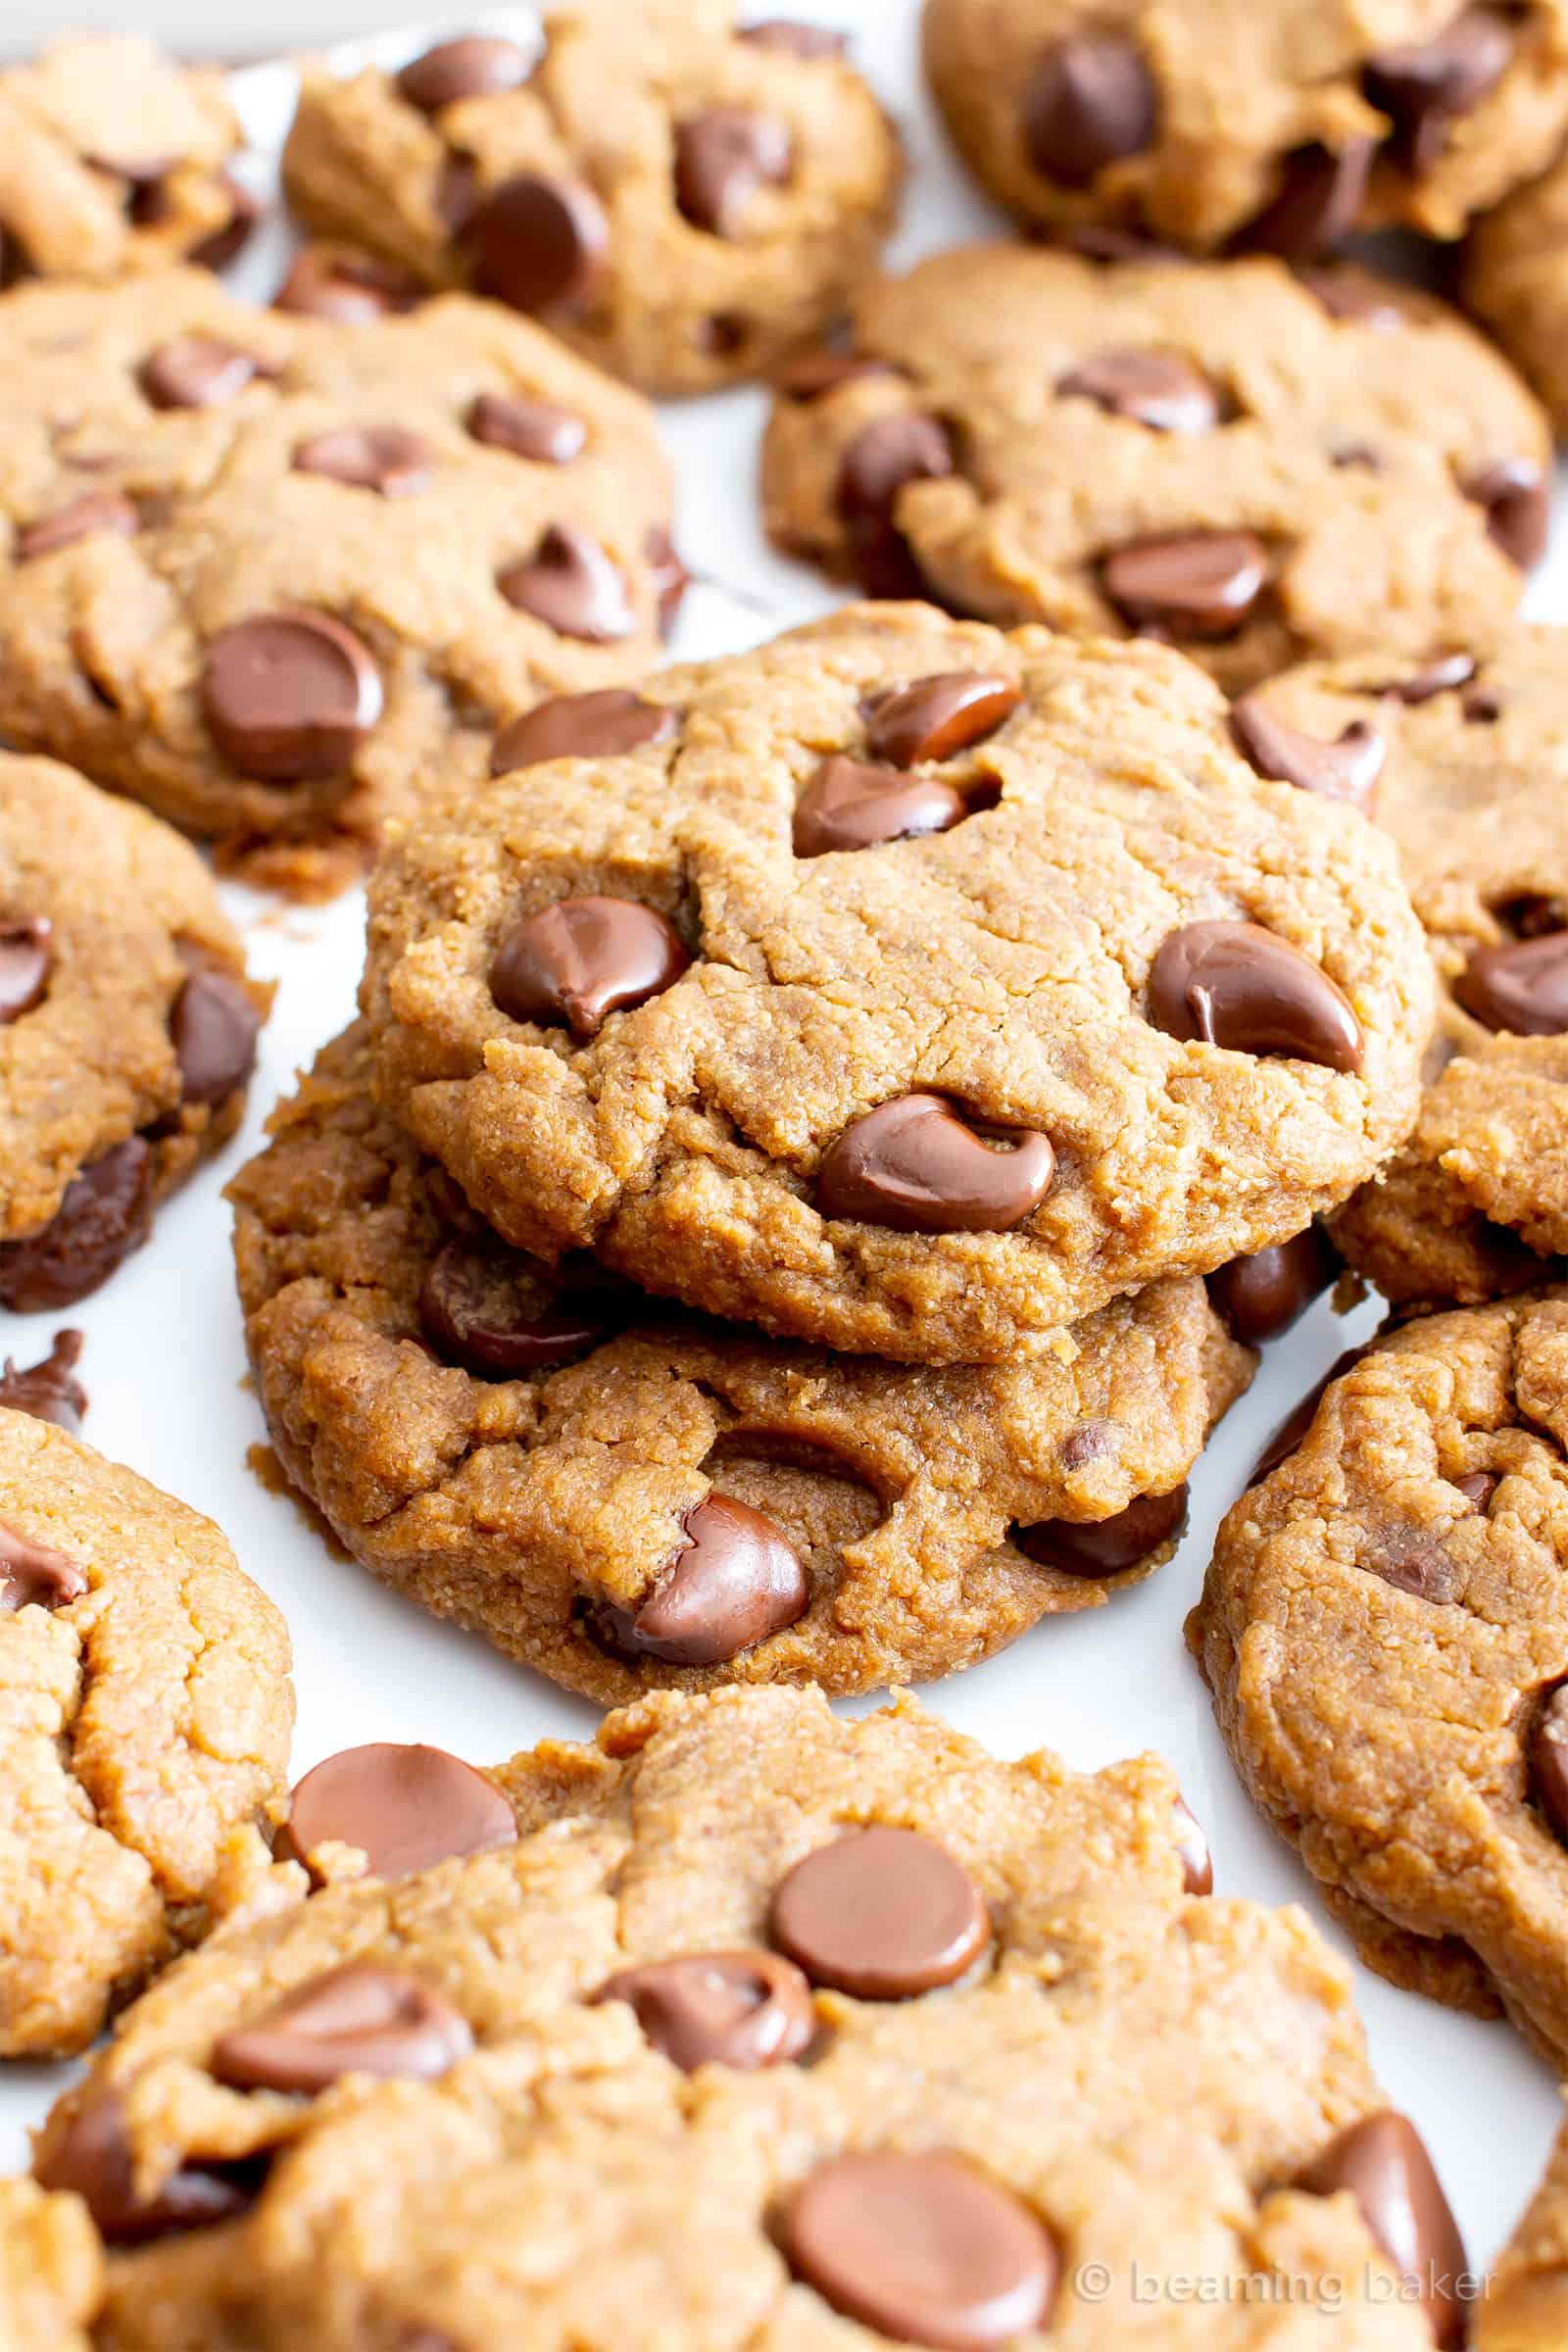 Gluten Free Peanut Butter Chocolate Chip Cookies (V, GF): an easy recipe for perfectly soft ‘n chewy chocolate chip cookies packed with peanut butter flavor! #Vegan #GlutenFree #DairyFree #PeanutButter #Cookies #Dessert #ChocolateChip | Recipe on BeamingBaker.com